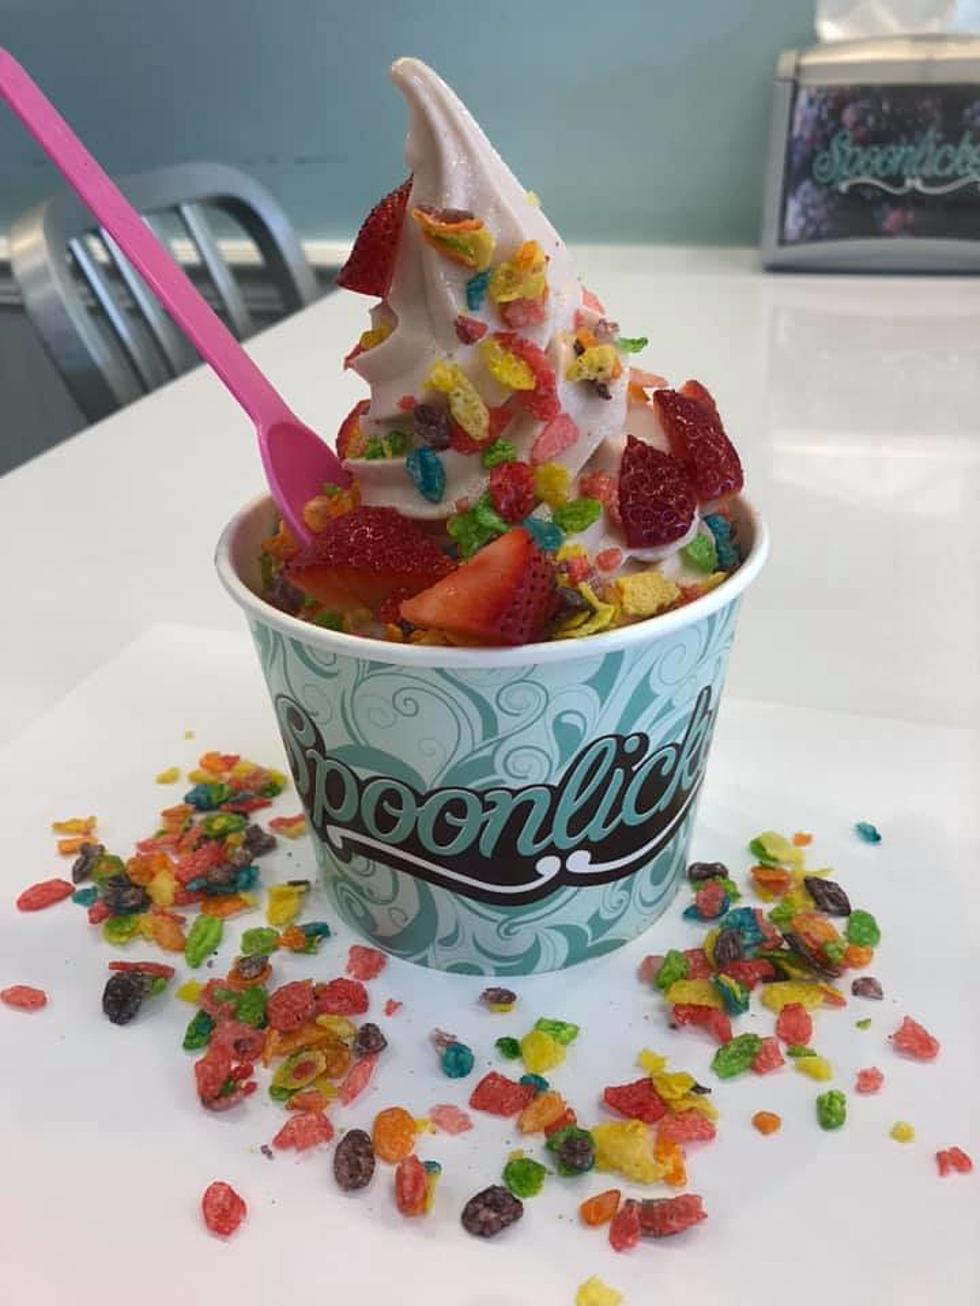 Spoonlickers Is No More, To Be Replaced By Sprinkles